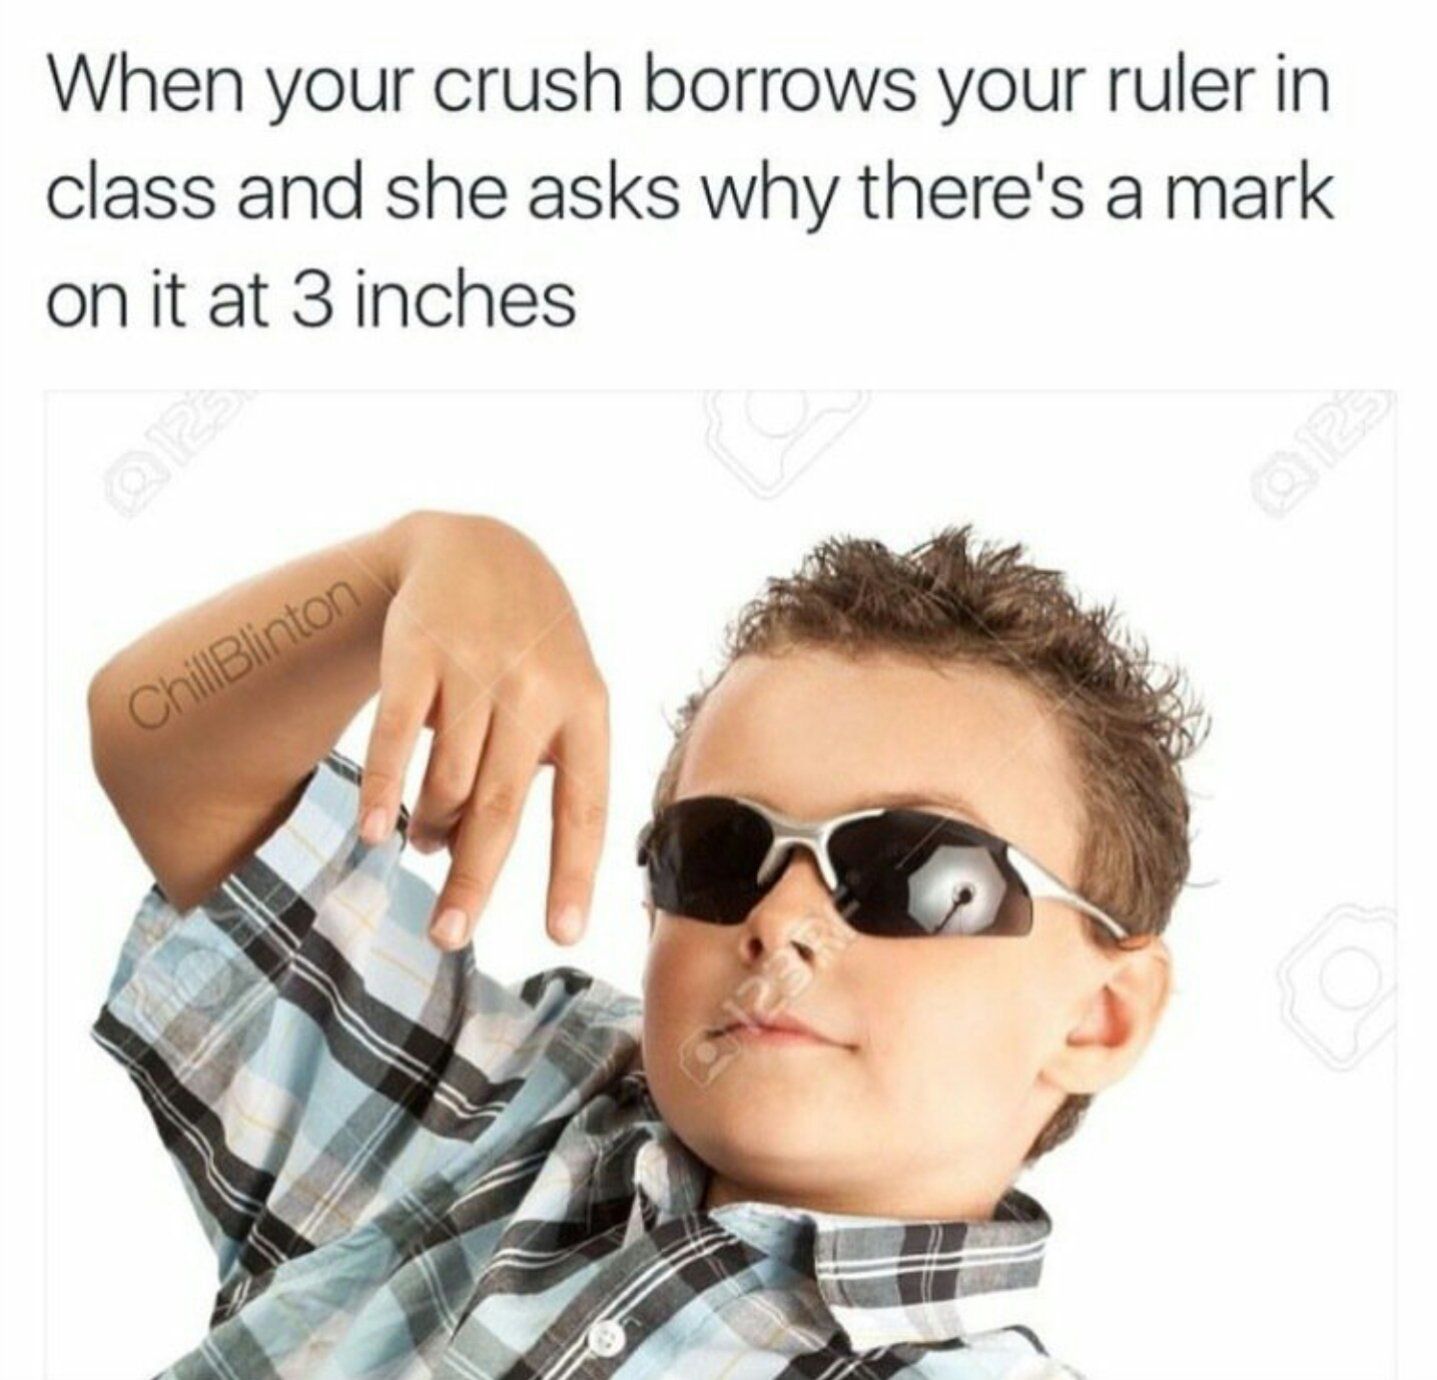 cool sunglasses kid - When your crush borrows your ruler in class and she asks why there's a mark on it at 3 inches ChillBlinton